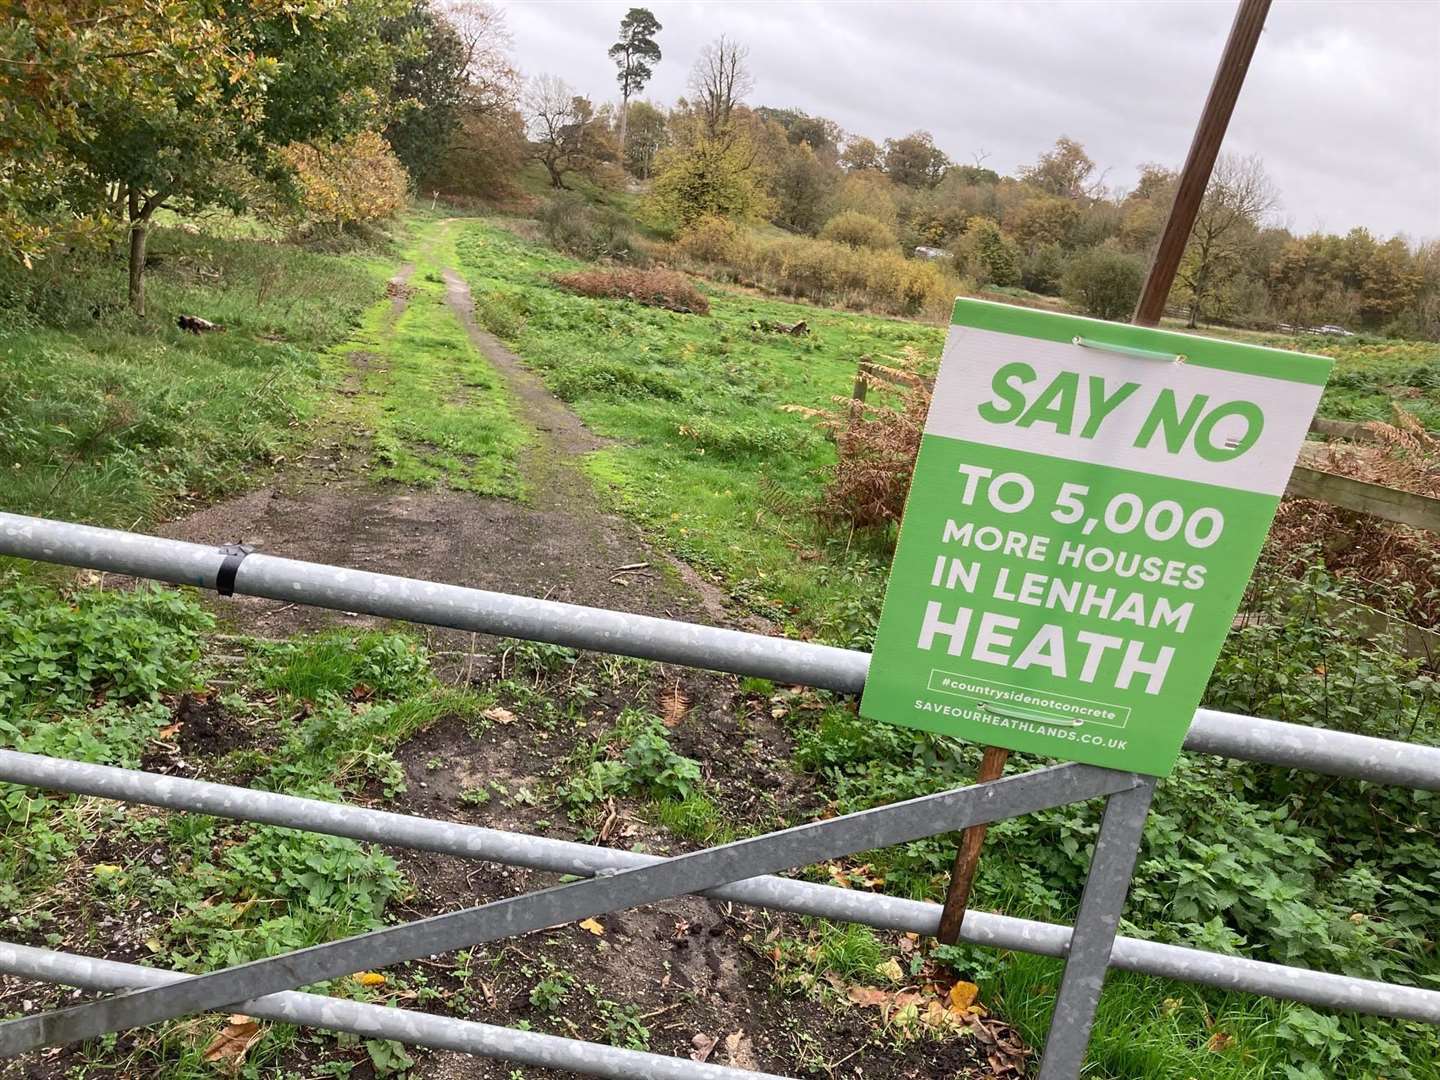 One of the many signs saying "no" to 5,000 homes at Lenham Heath